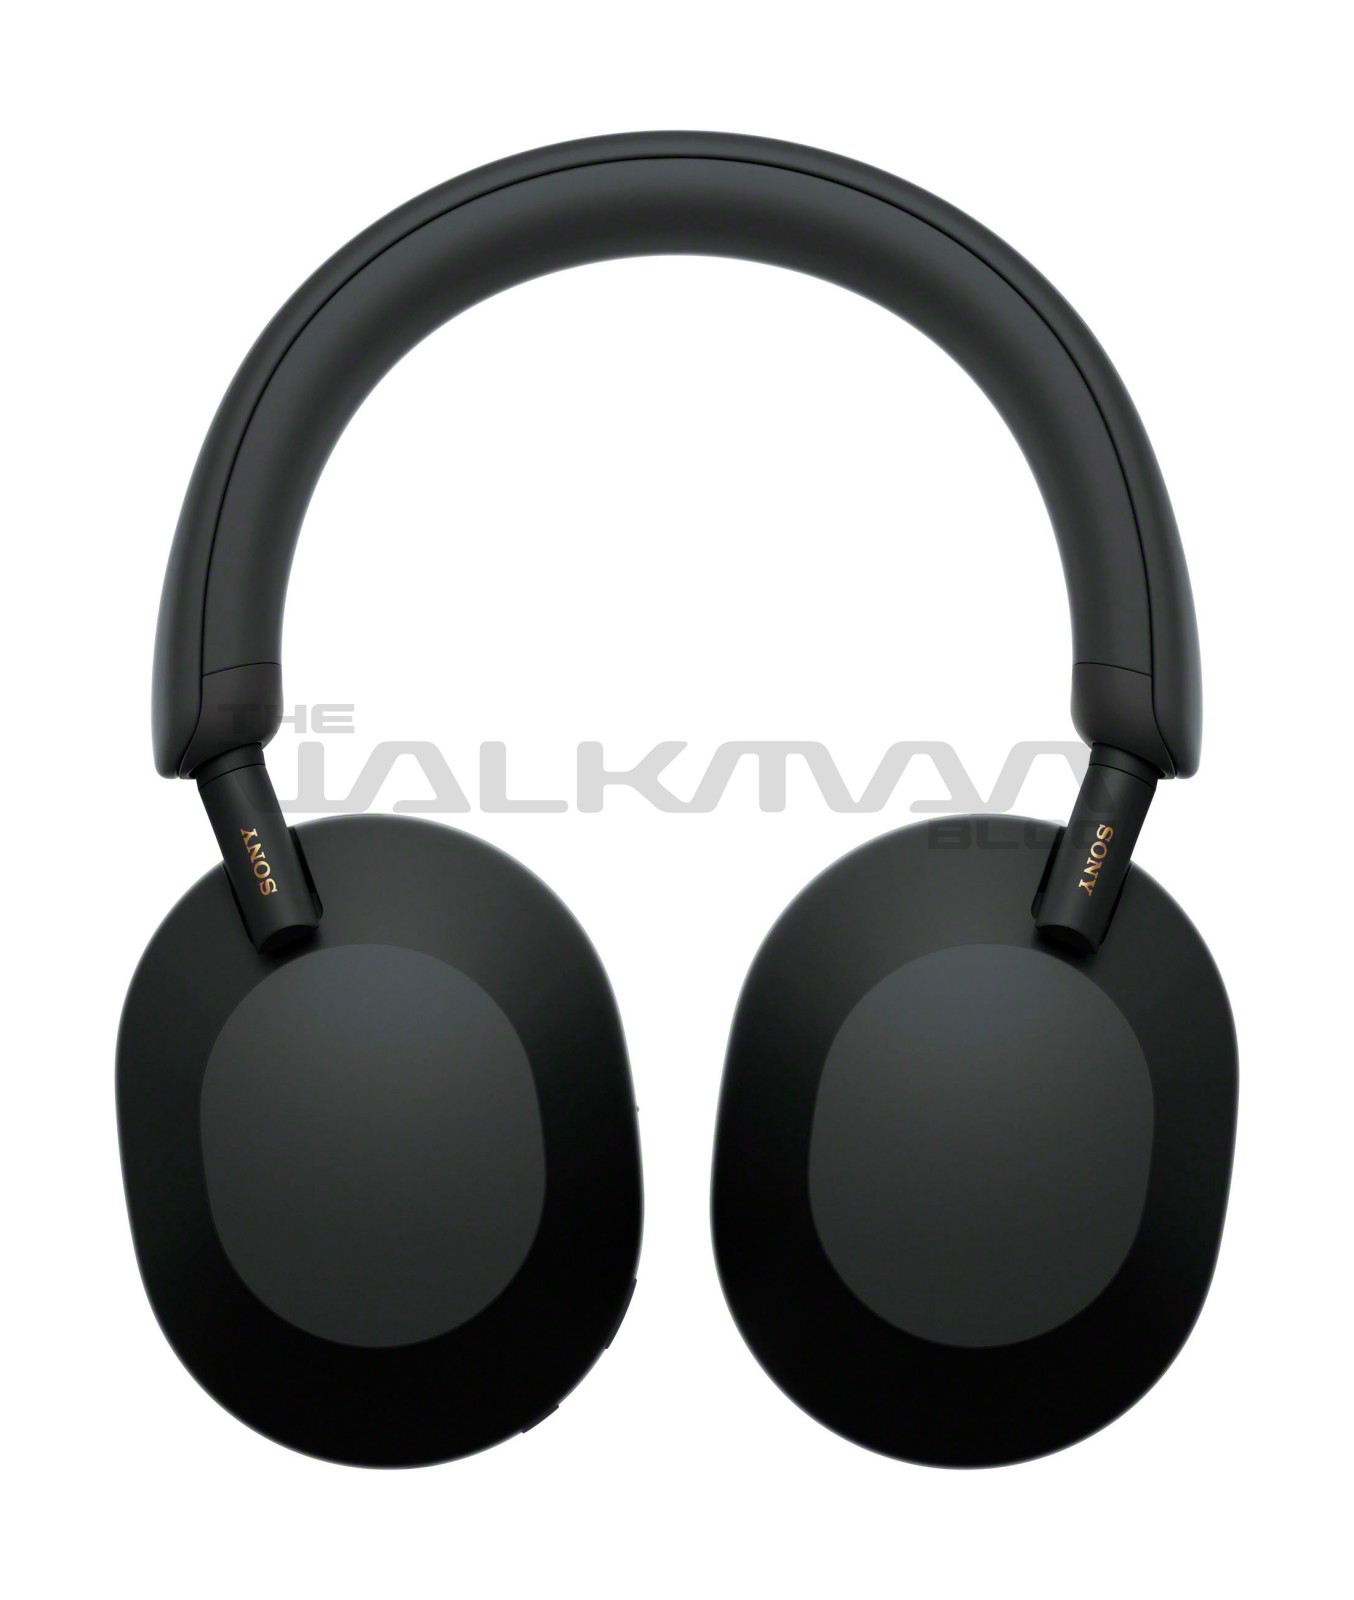 The Walkman Blog: Sony WH-1000XM5 leak shows full redesign (update 5)